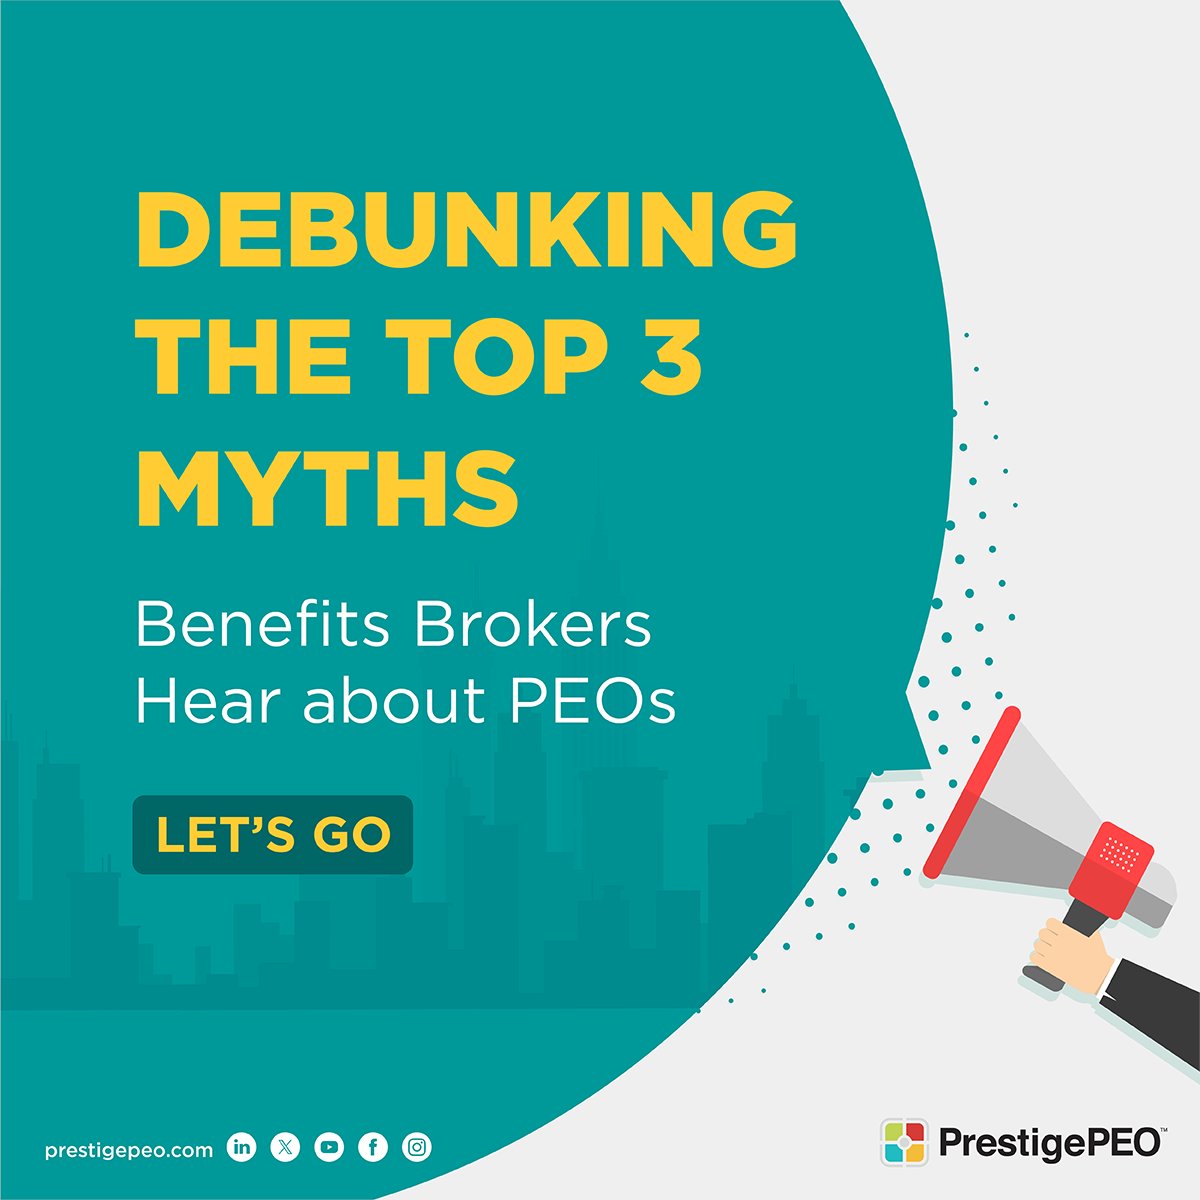 #PrestigePEO has heard all the misconceptions about PEOs, but we’re here to clear up each and every one of them for our #benefitsadvisors. Let’s debunk some #PEO myths together! bit.ly/44zHJiR